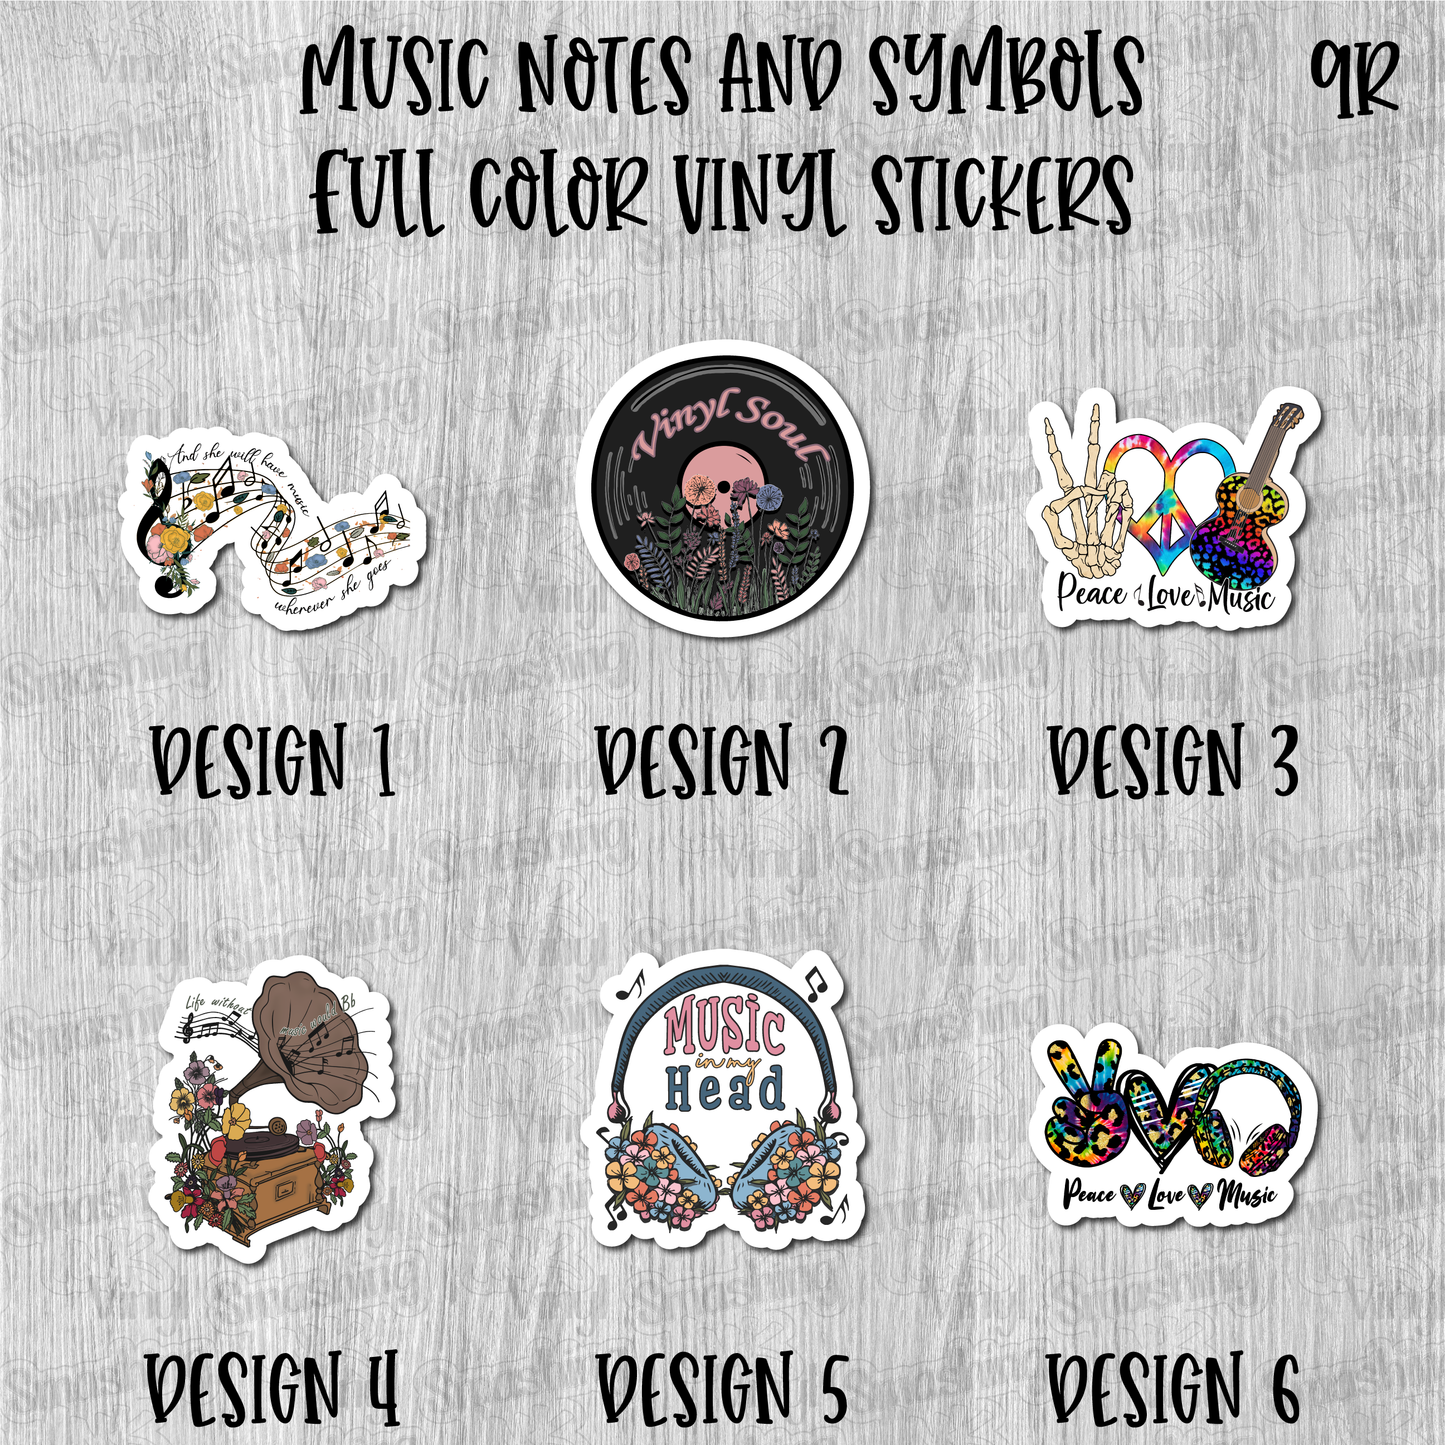 Music Notes and Symbols - Full Color Vinyl Stickers (SHIPS IN 3-7 BUS DAYS)